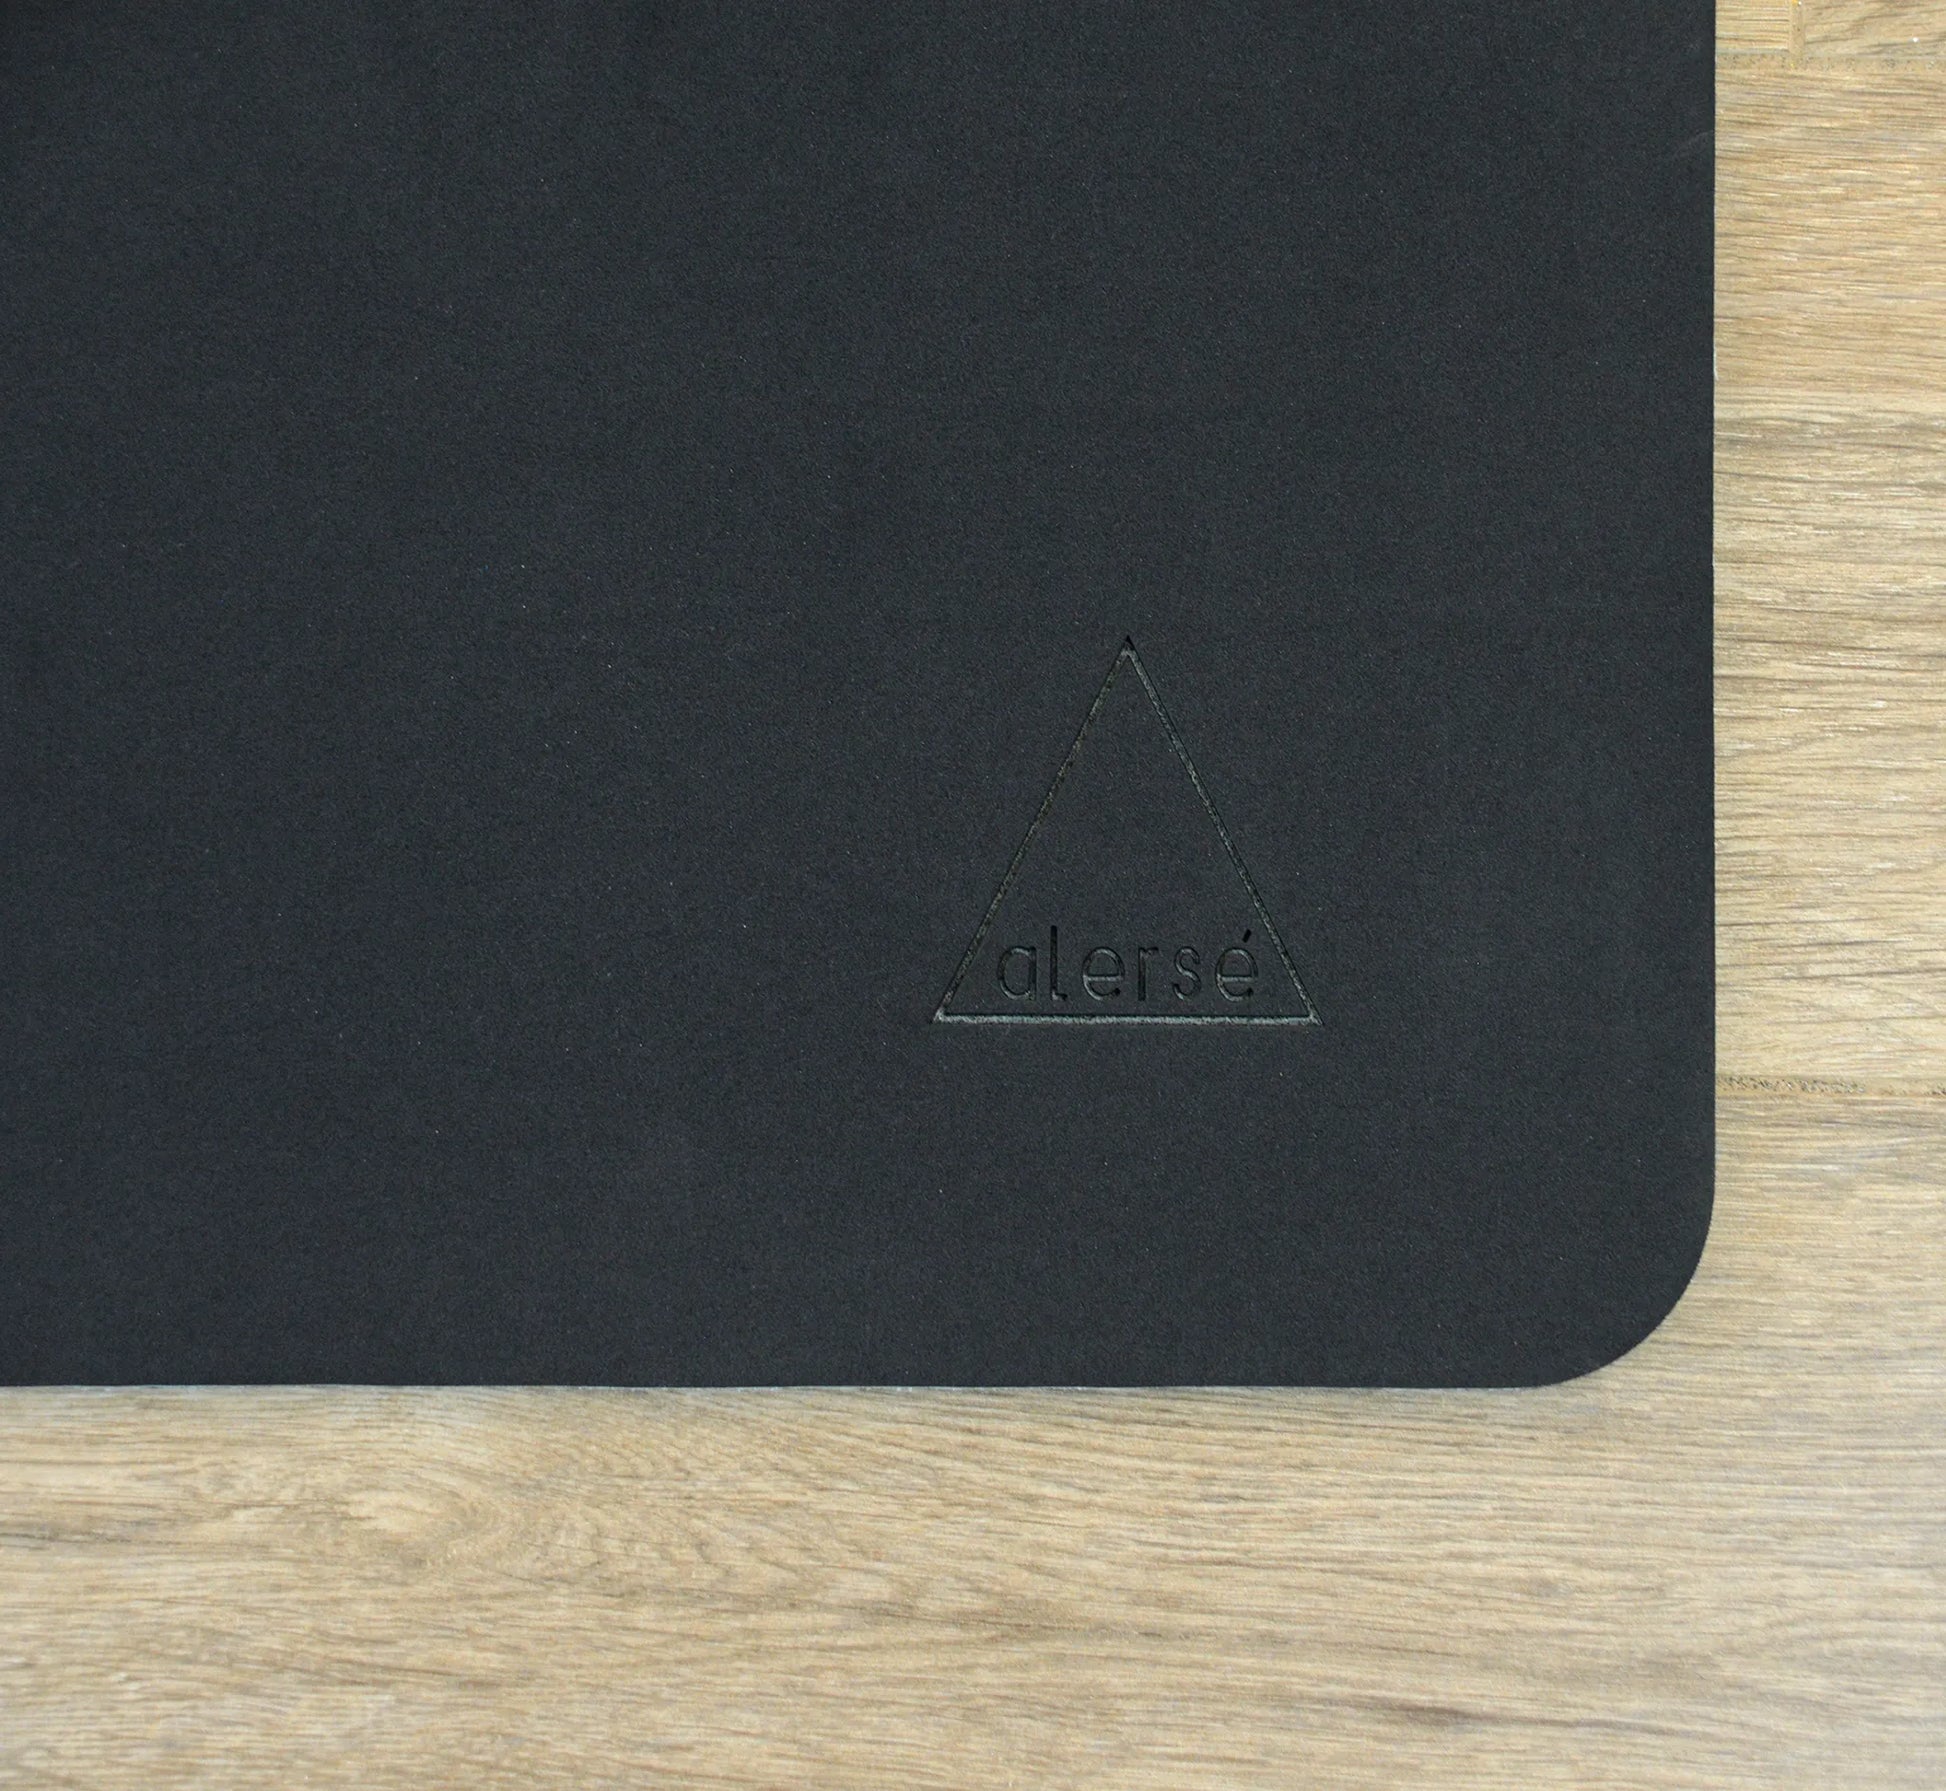 Corner of a black yoga mat with a Alerse logo on it.